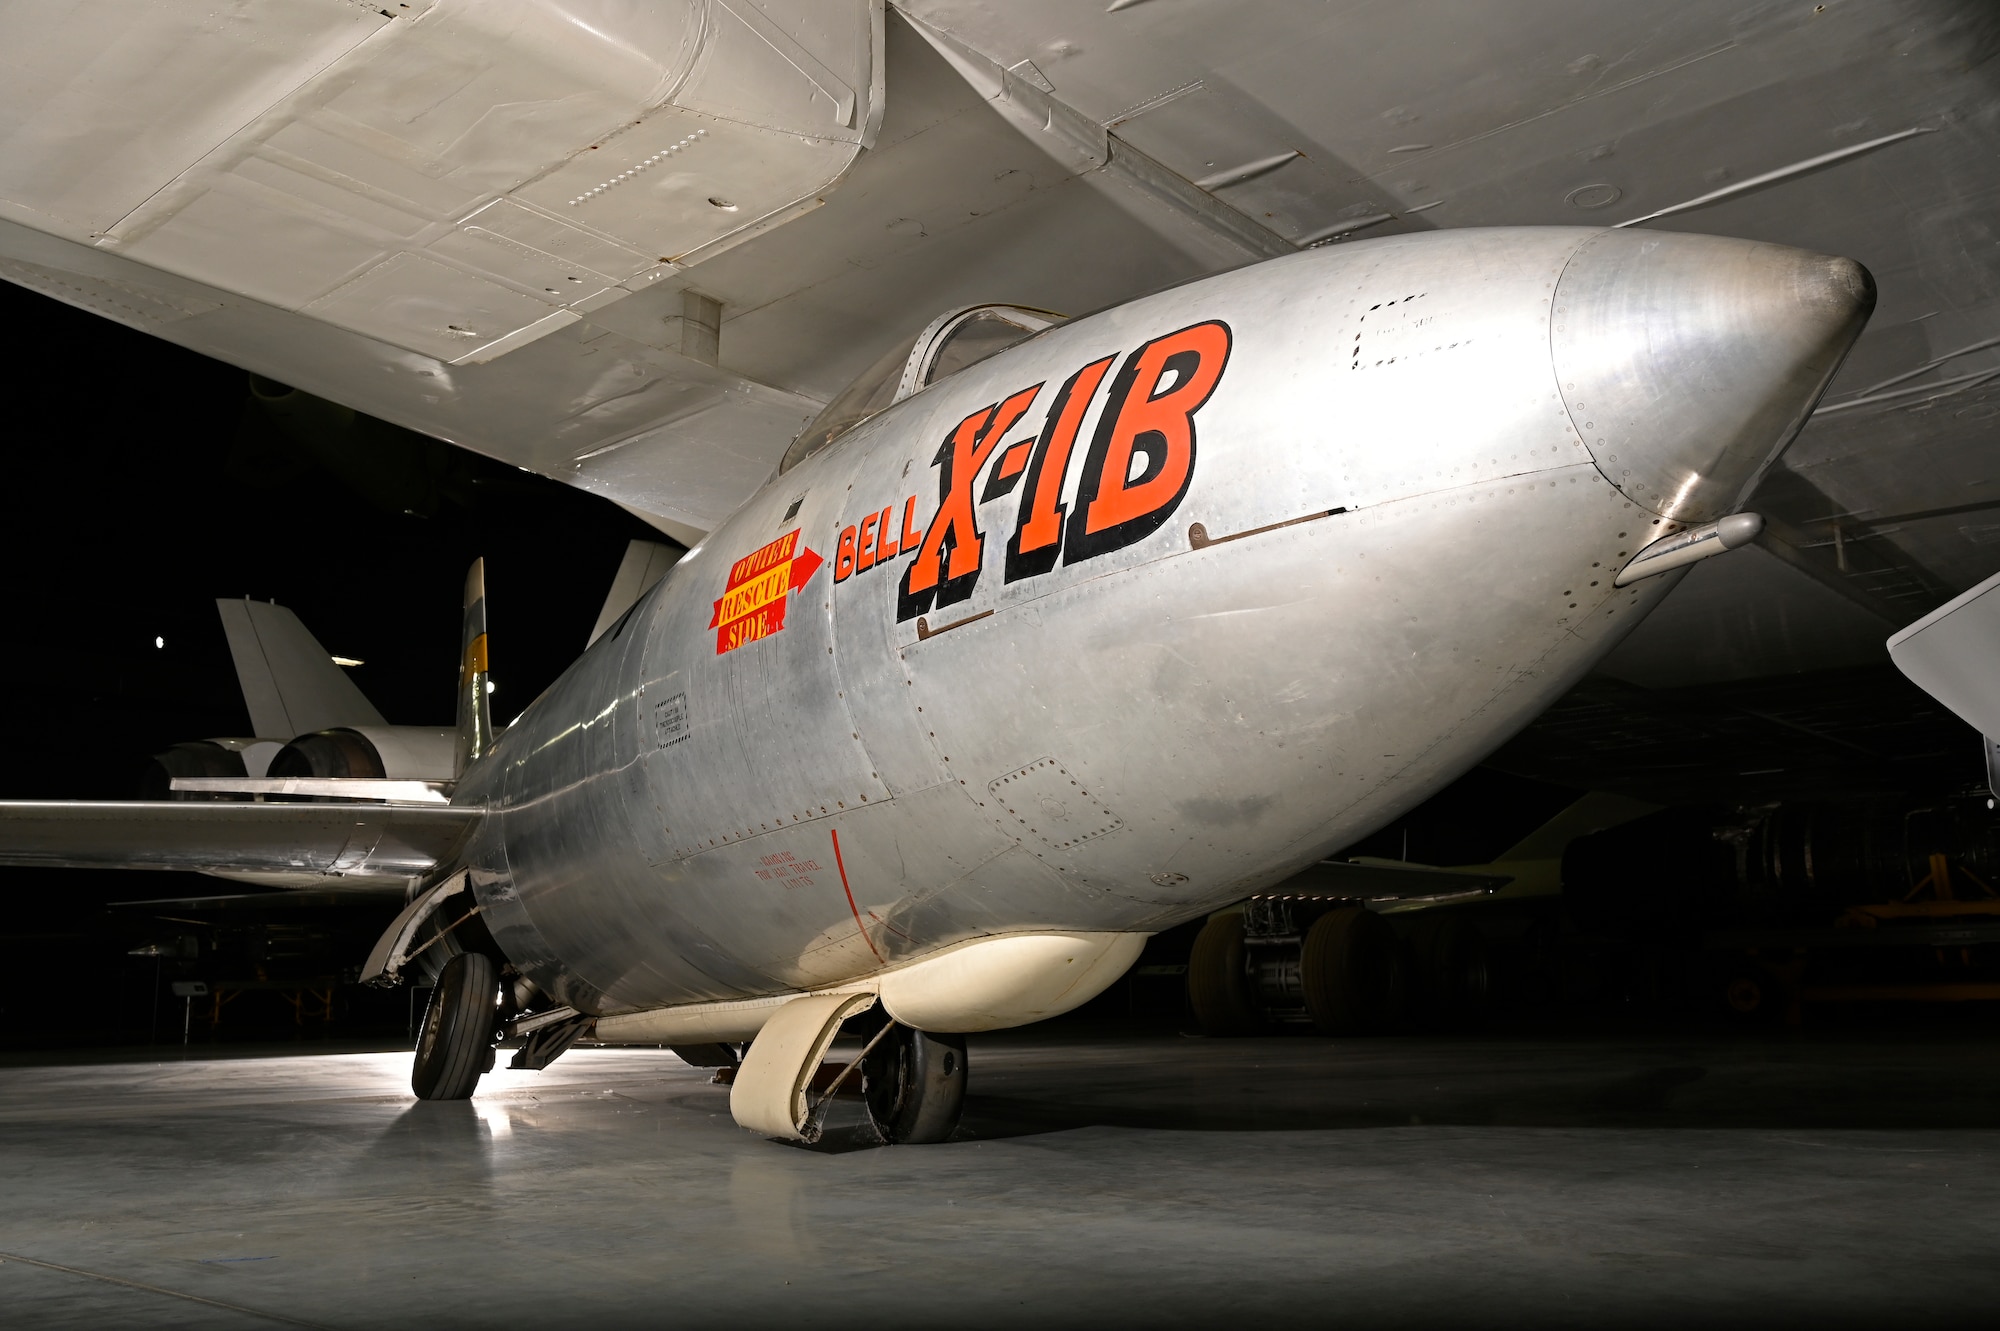 Bell X-1B on display in the National Museum of the U.S. Air Force Research and Development Gallery.